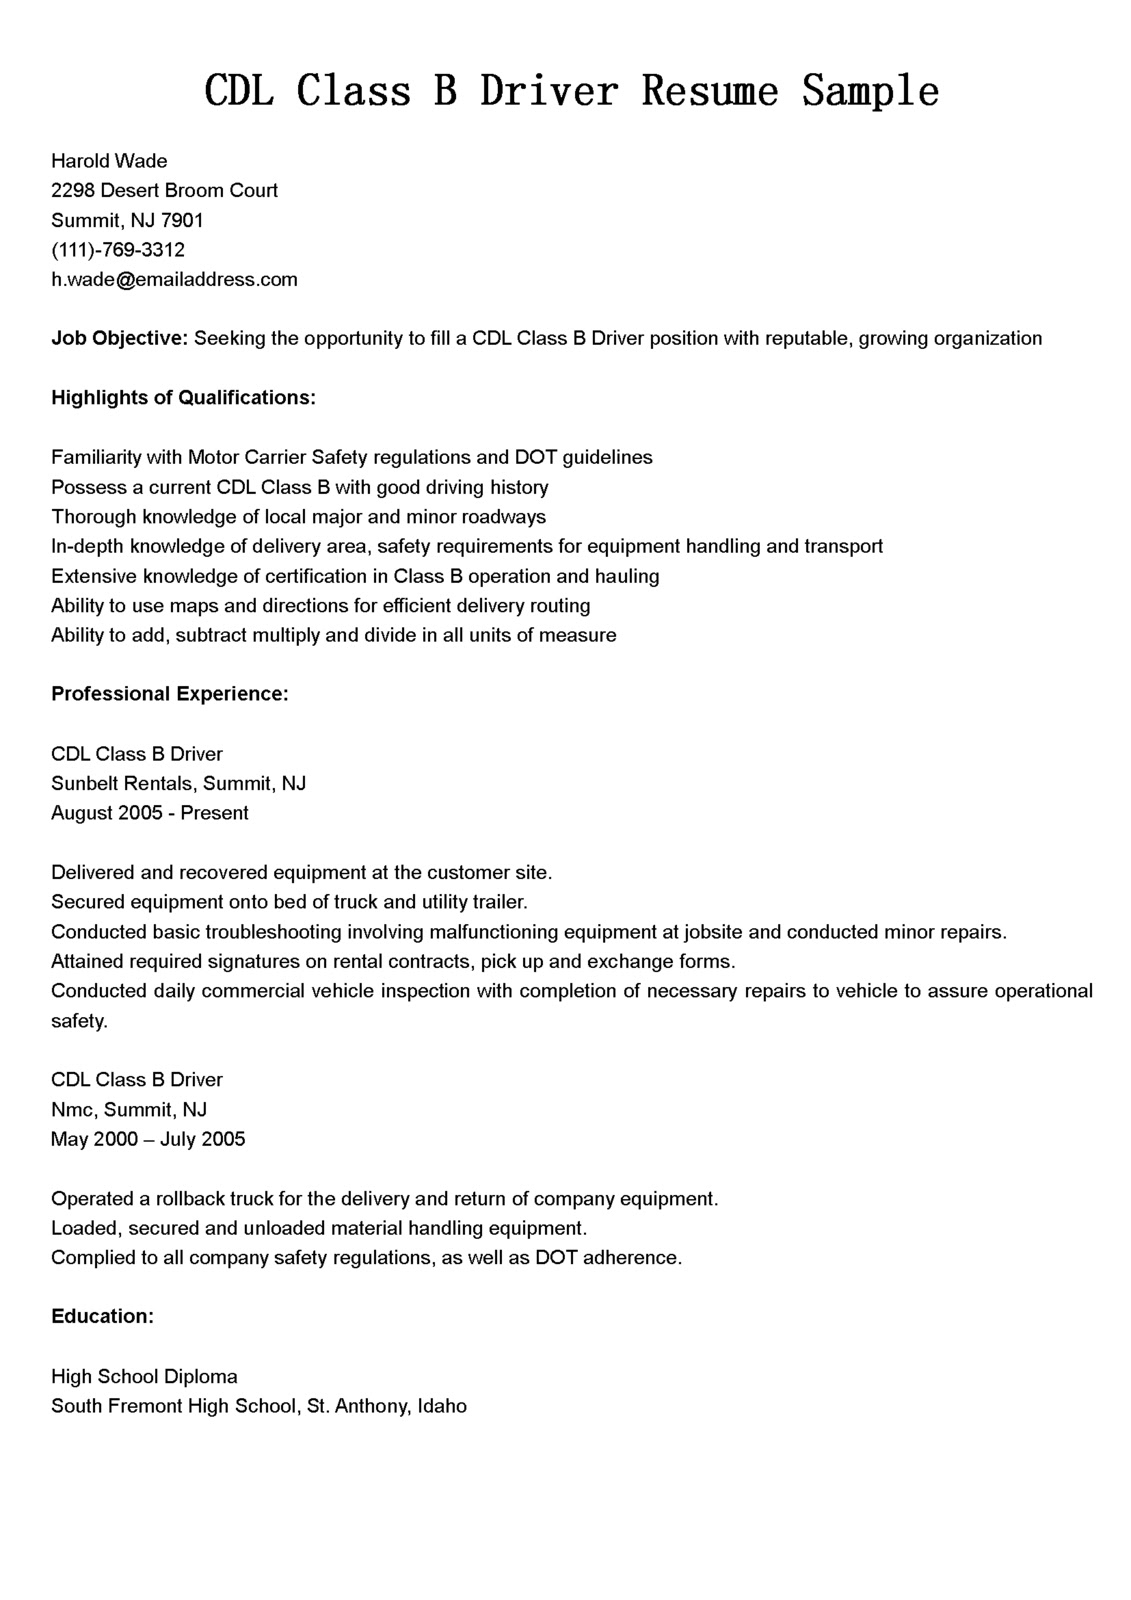 driver resumes cdl class b driver resume sample